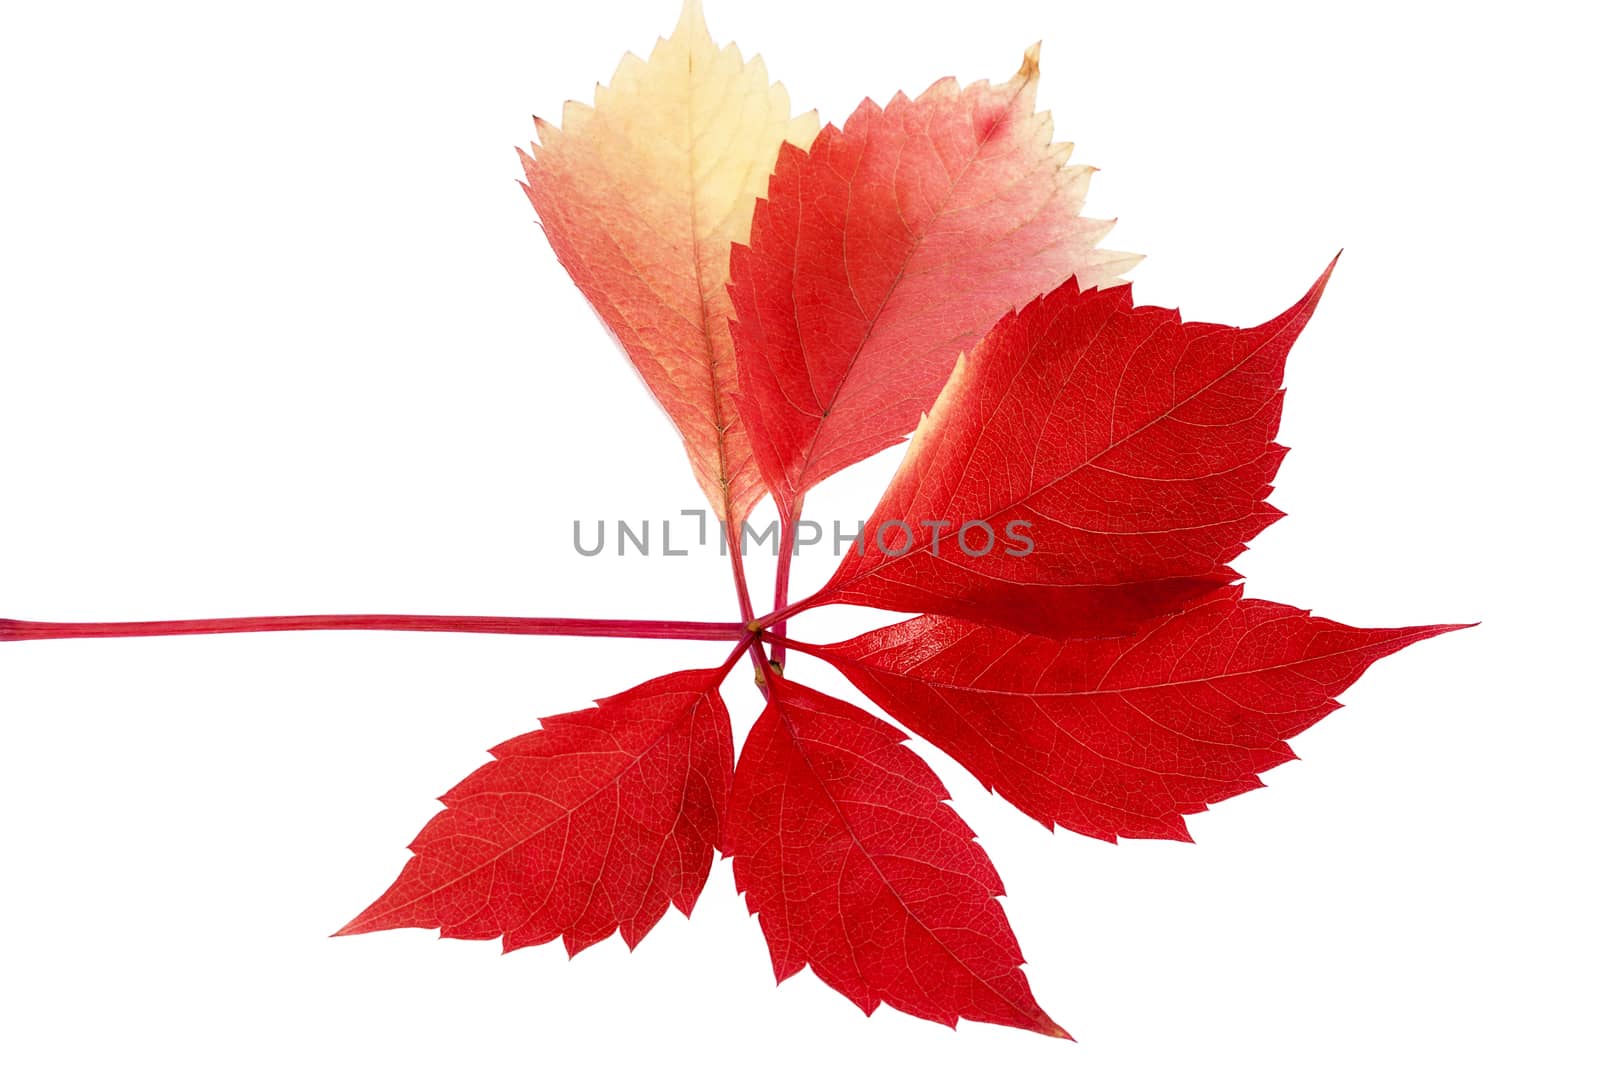 Leaf of parthenocissus in autumnal colors on white background by mychadre77